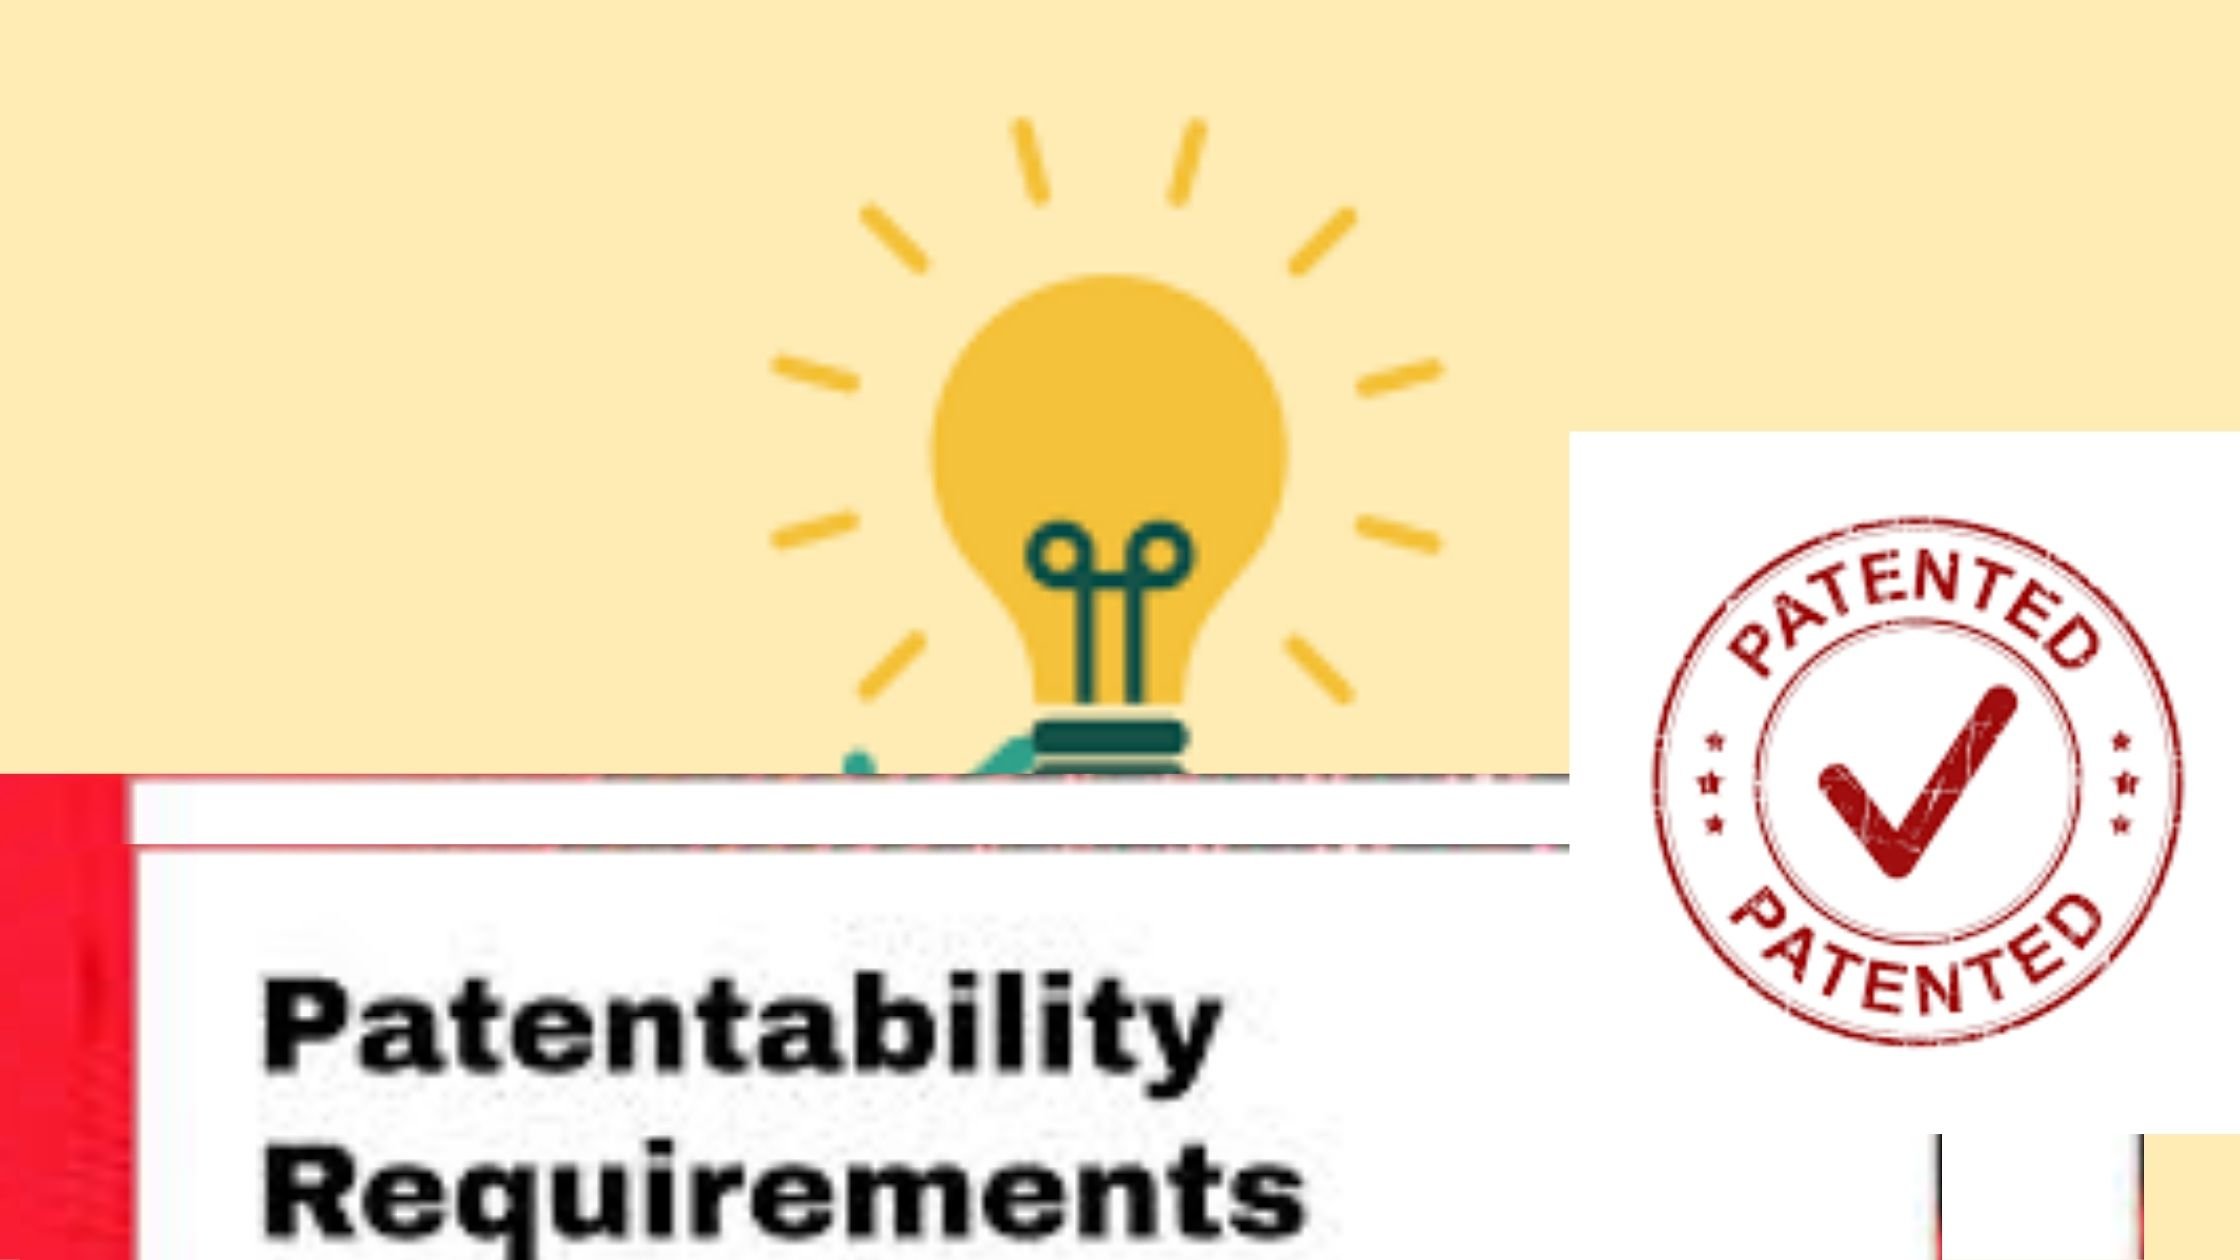 What is Patentability Requirements?